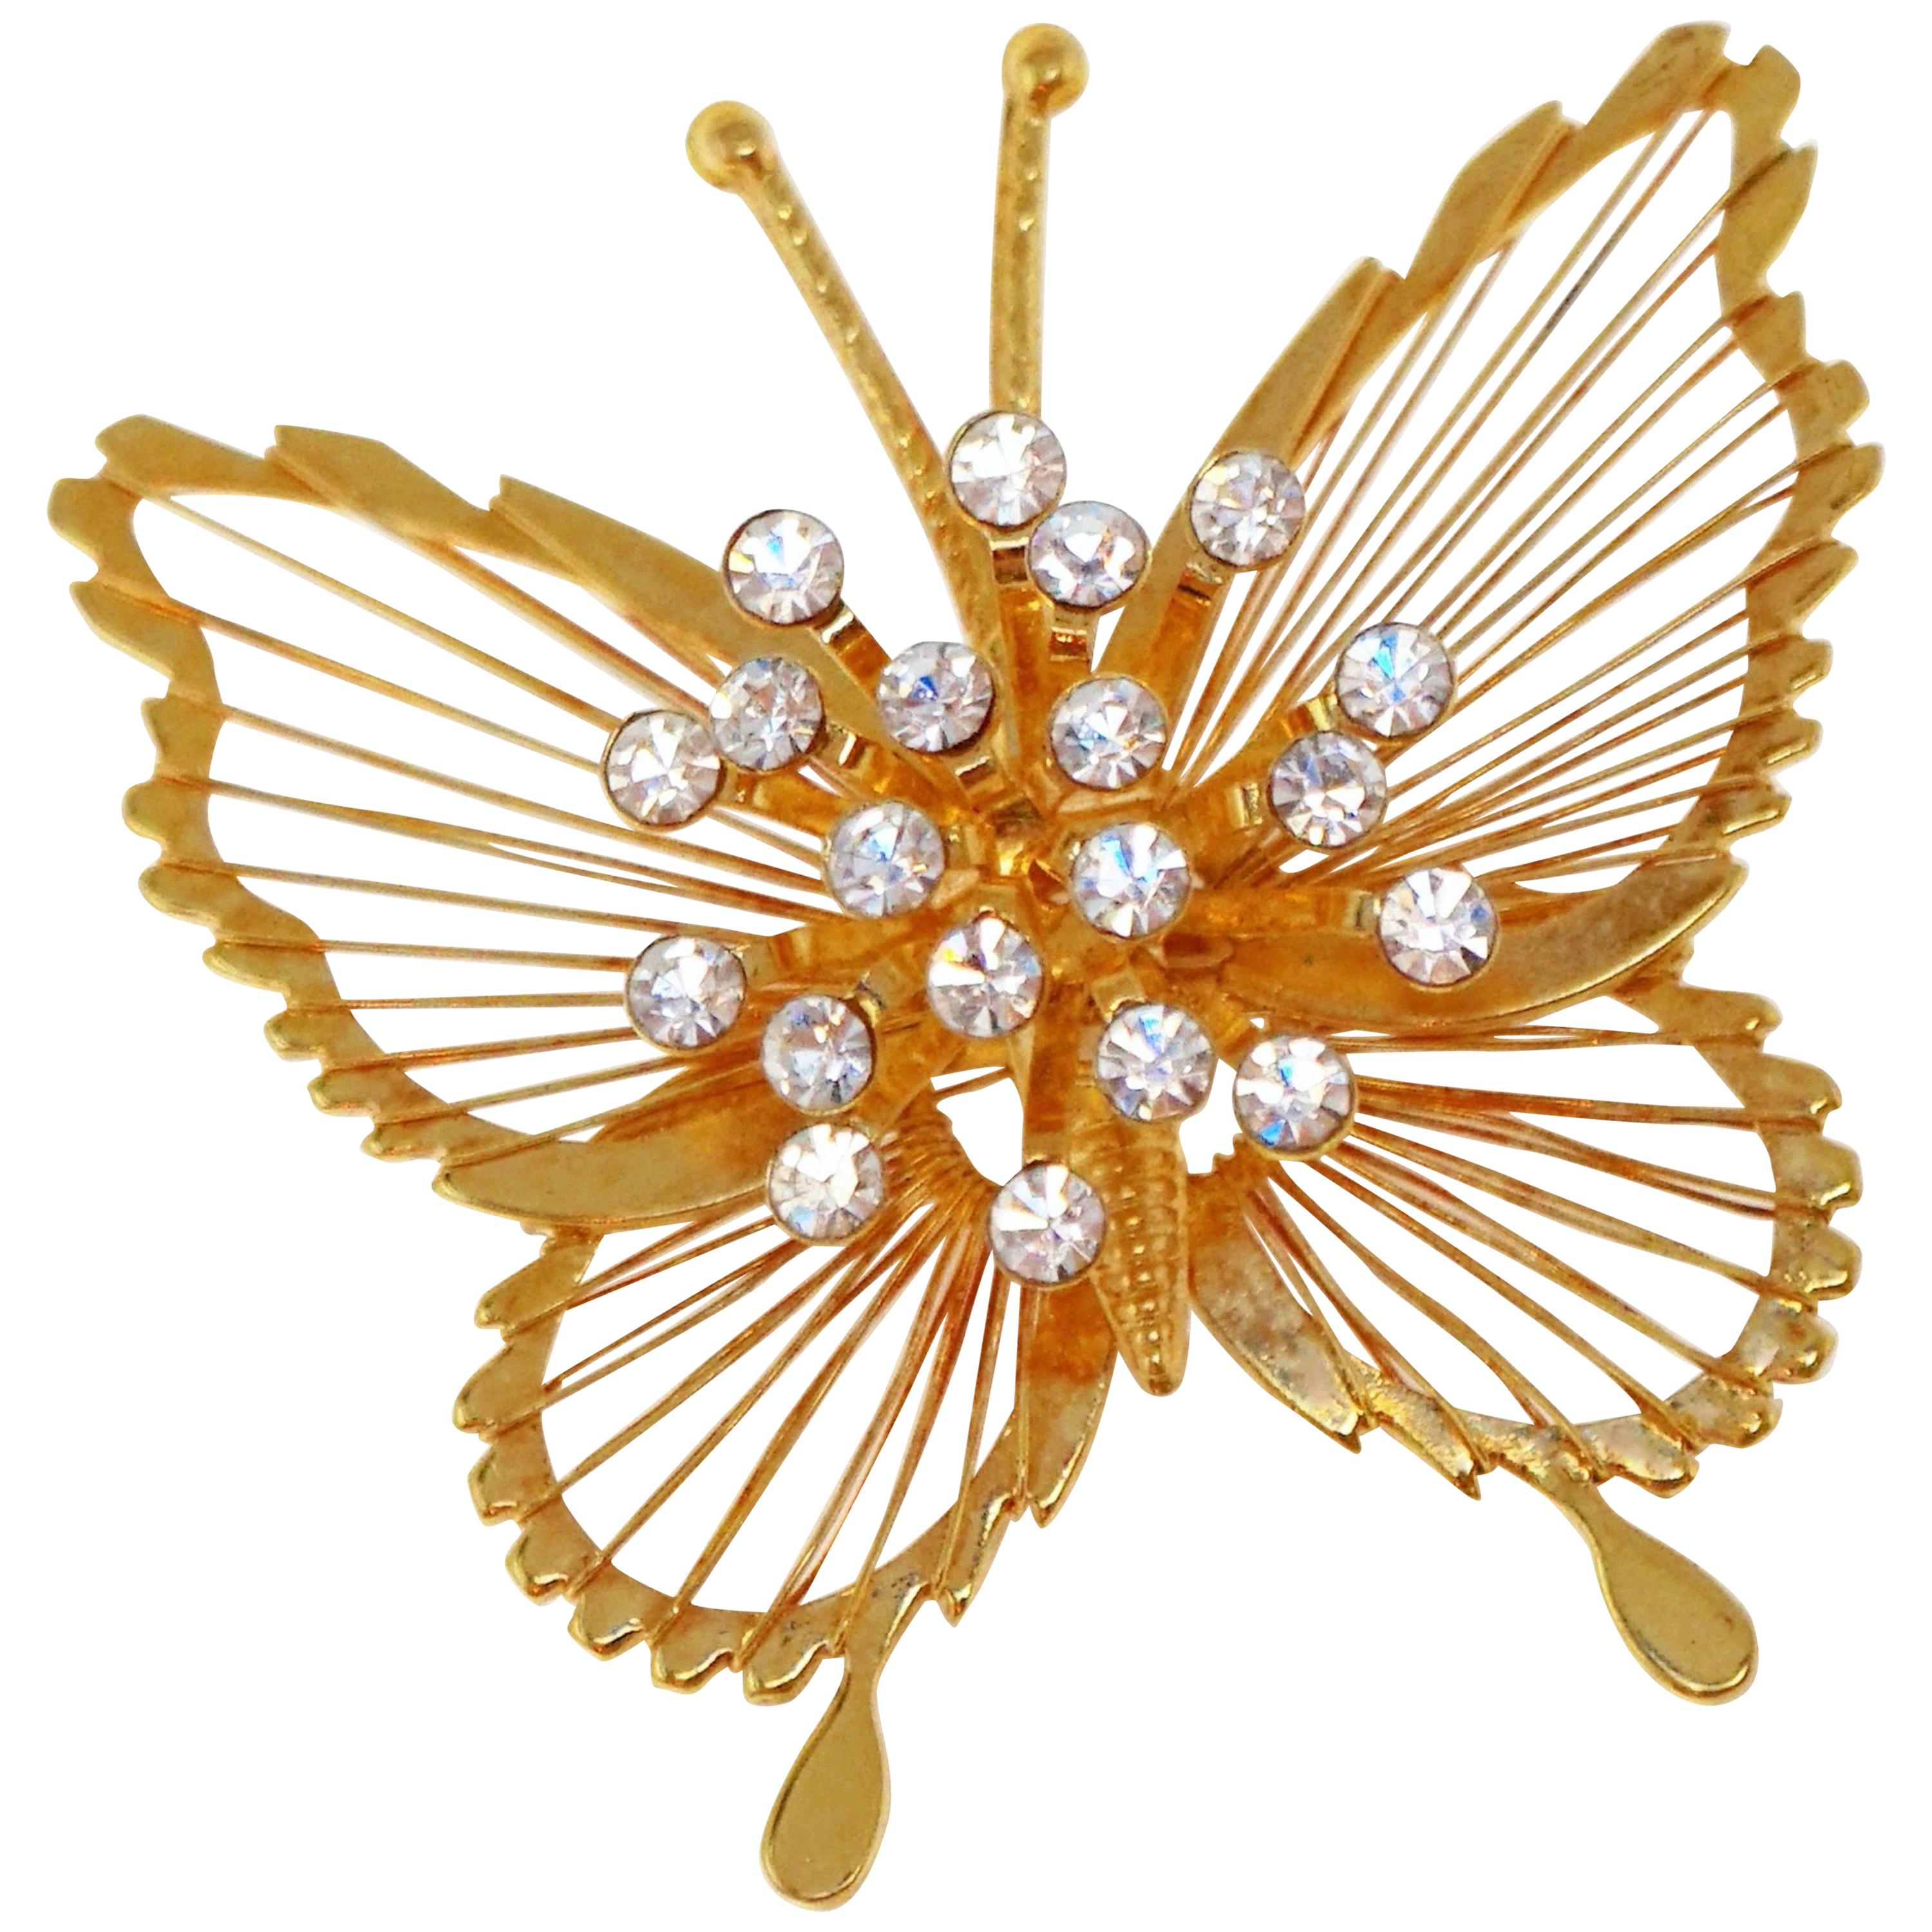 Monet 1970s Gilded Butterfly Brooch with Crystal Rhinestones, Signed